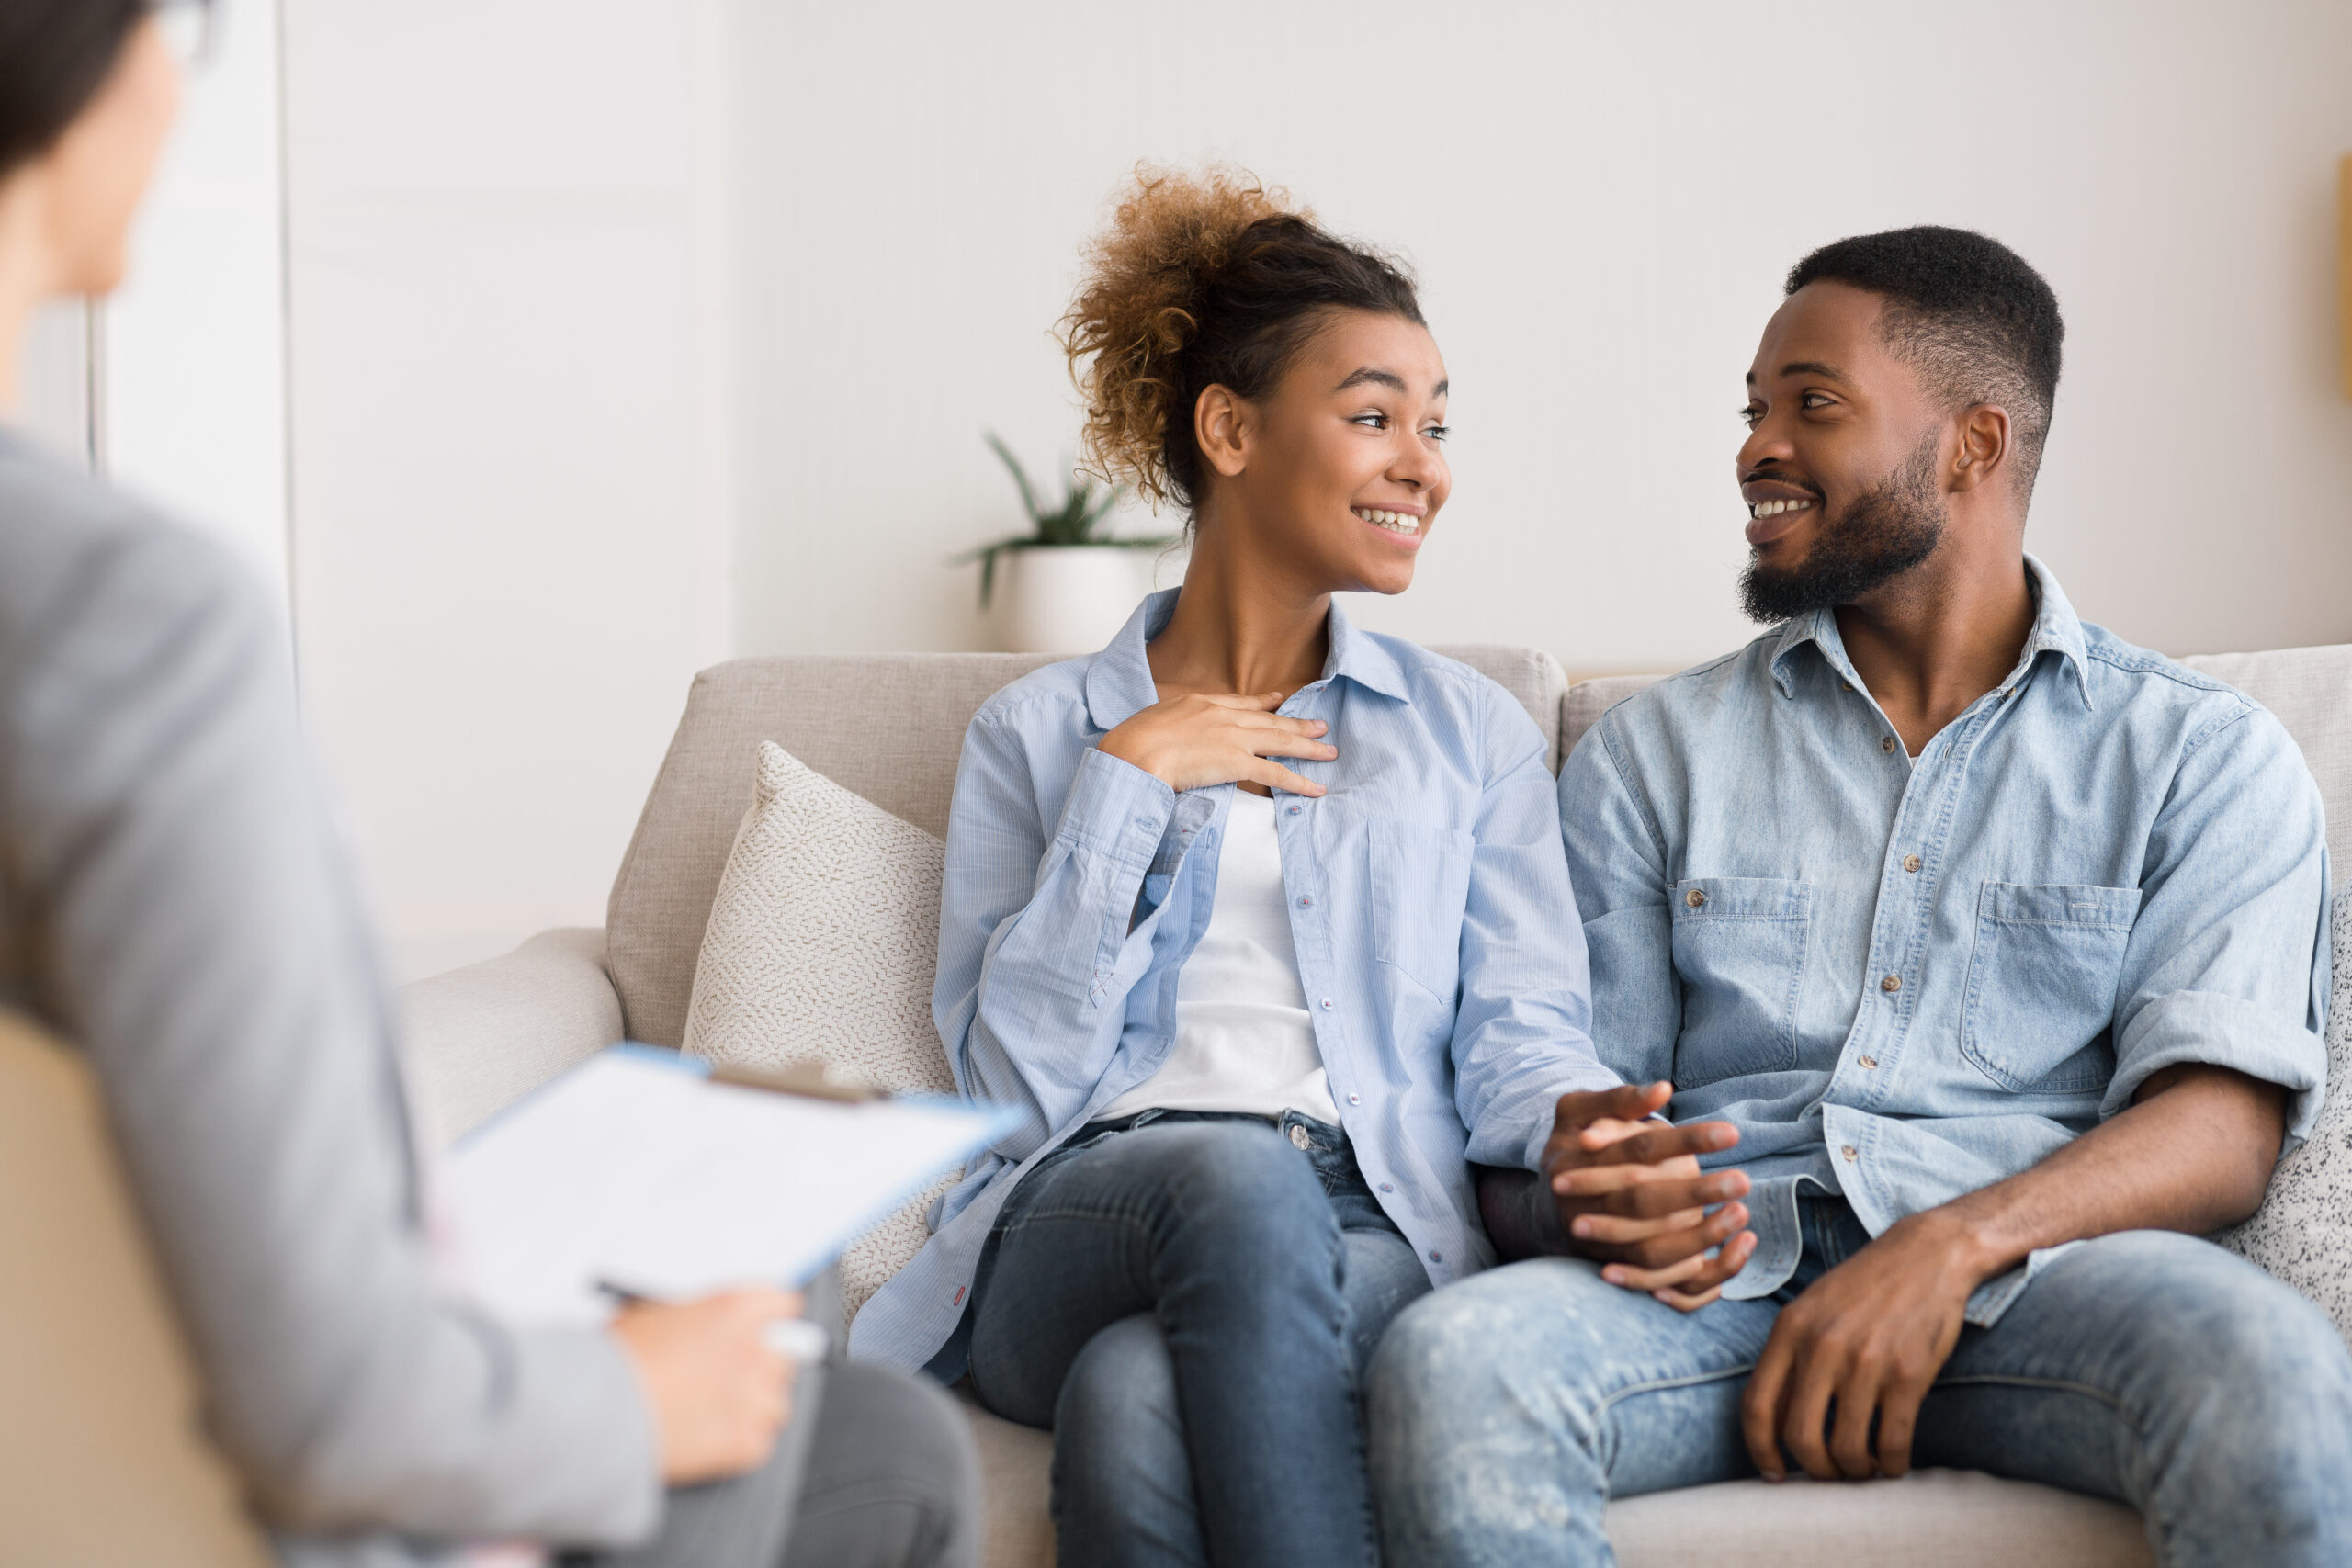 5 Reasons Happily Married Couples Should Go to Therapy